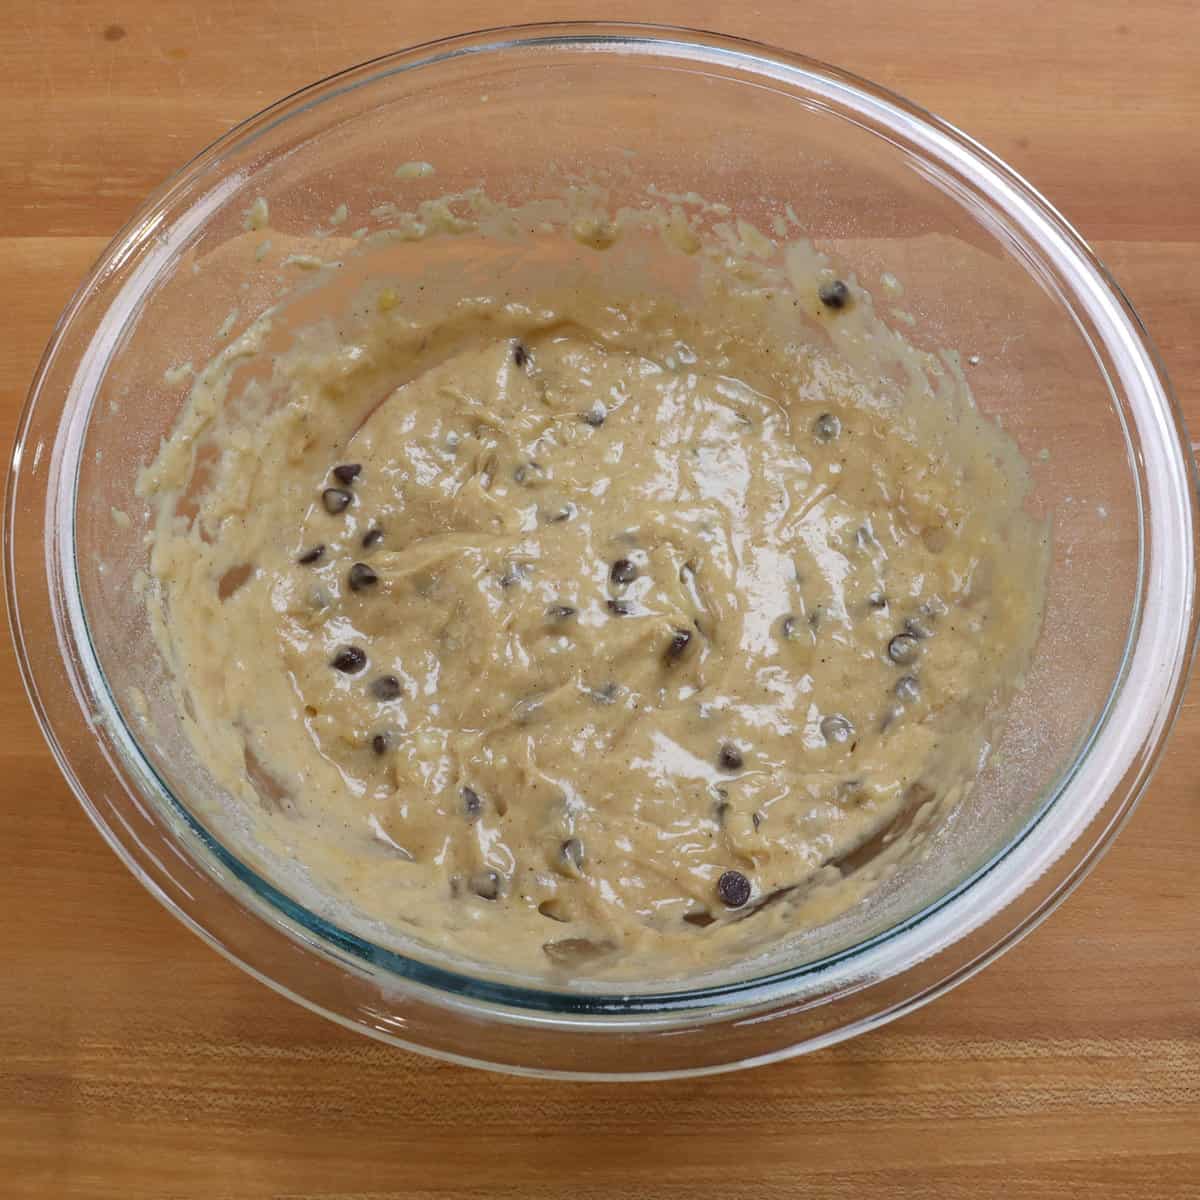 chocolate chips folded into banana bread batter in a mixing bowl.